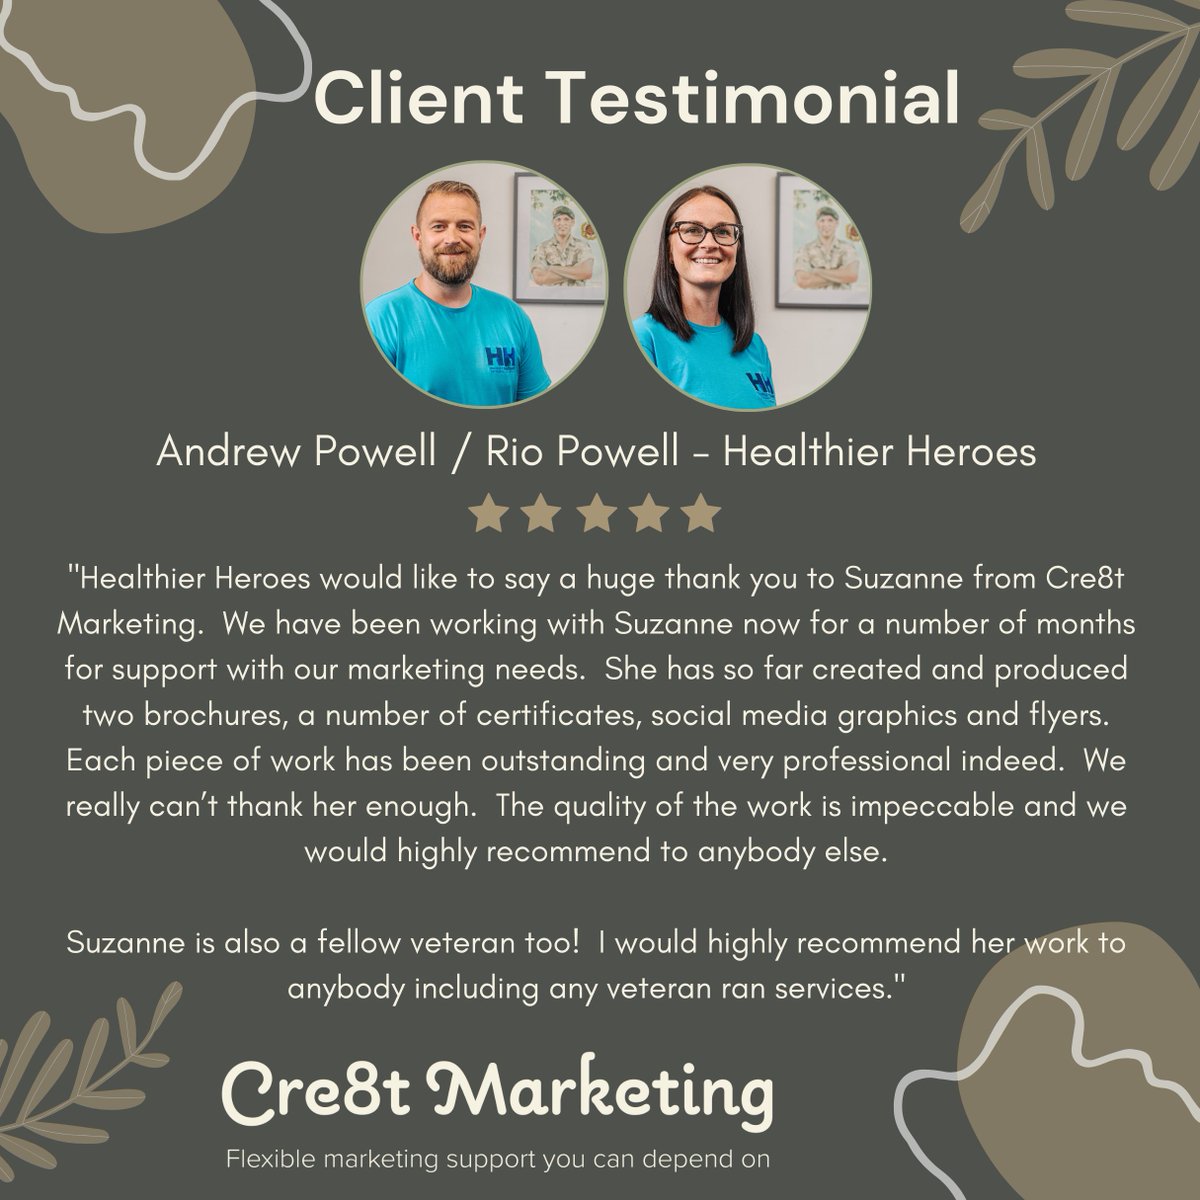 Who doesn’t love a 5-star start to the week? 

Healthier Heroes, led by Andrew, Rio, and the team, are doing a superb job in our local community and provide an outstanding service and support to help people rebuild lives.

#MarketingWithTheMilitary #Cre8tMarketing